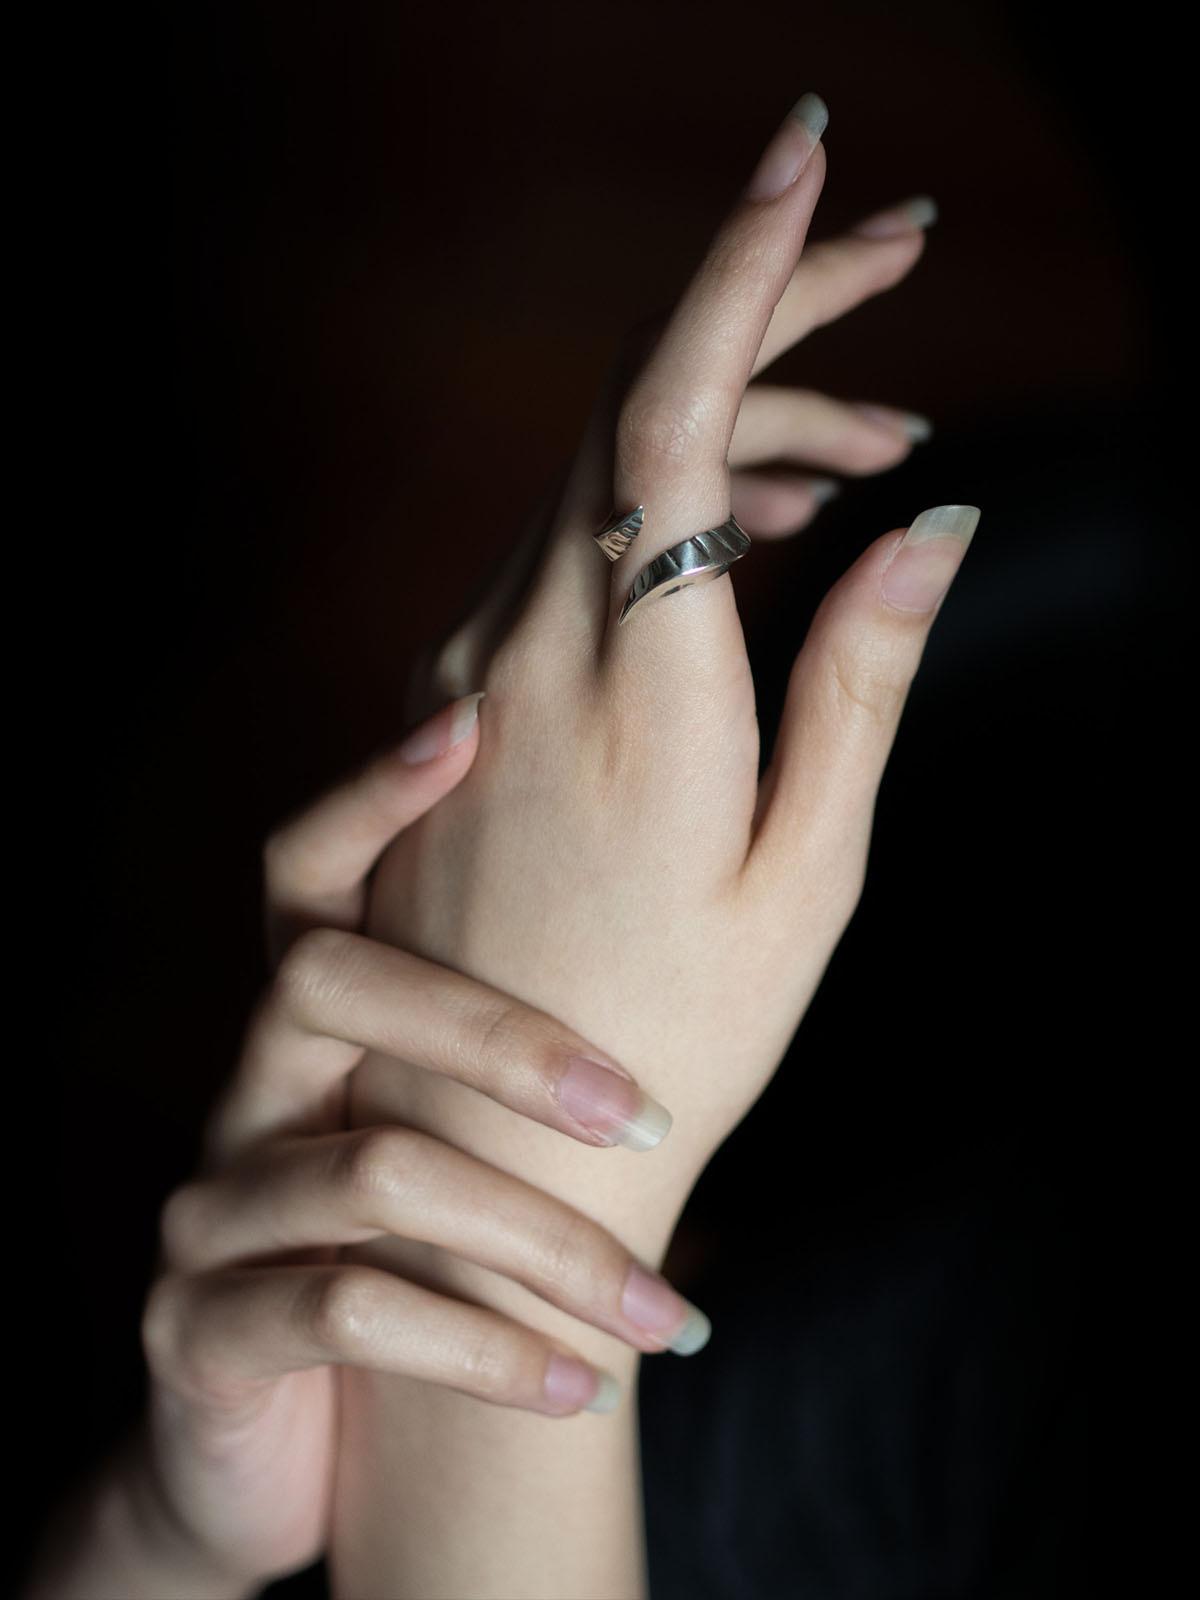 Aubrie's hands are posed delicately to feature a silver ring on her left index finger. The loop of the ring is broken by a split, and each end is a draconian prong pointing away from the other.